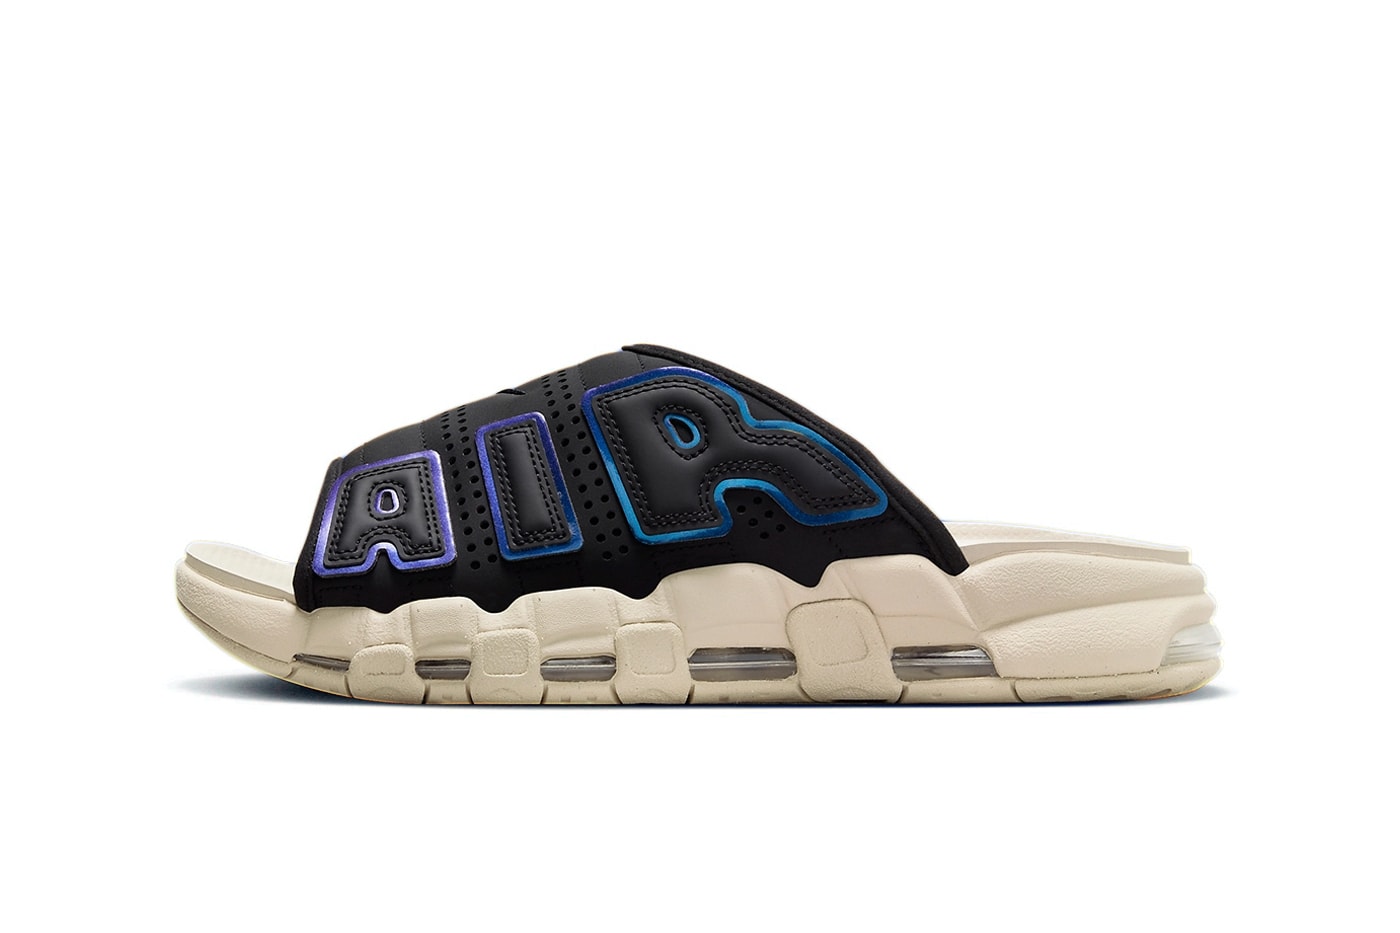 Are You Looking Forward To The Nike Air More Uptempo Scottie